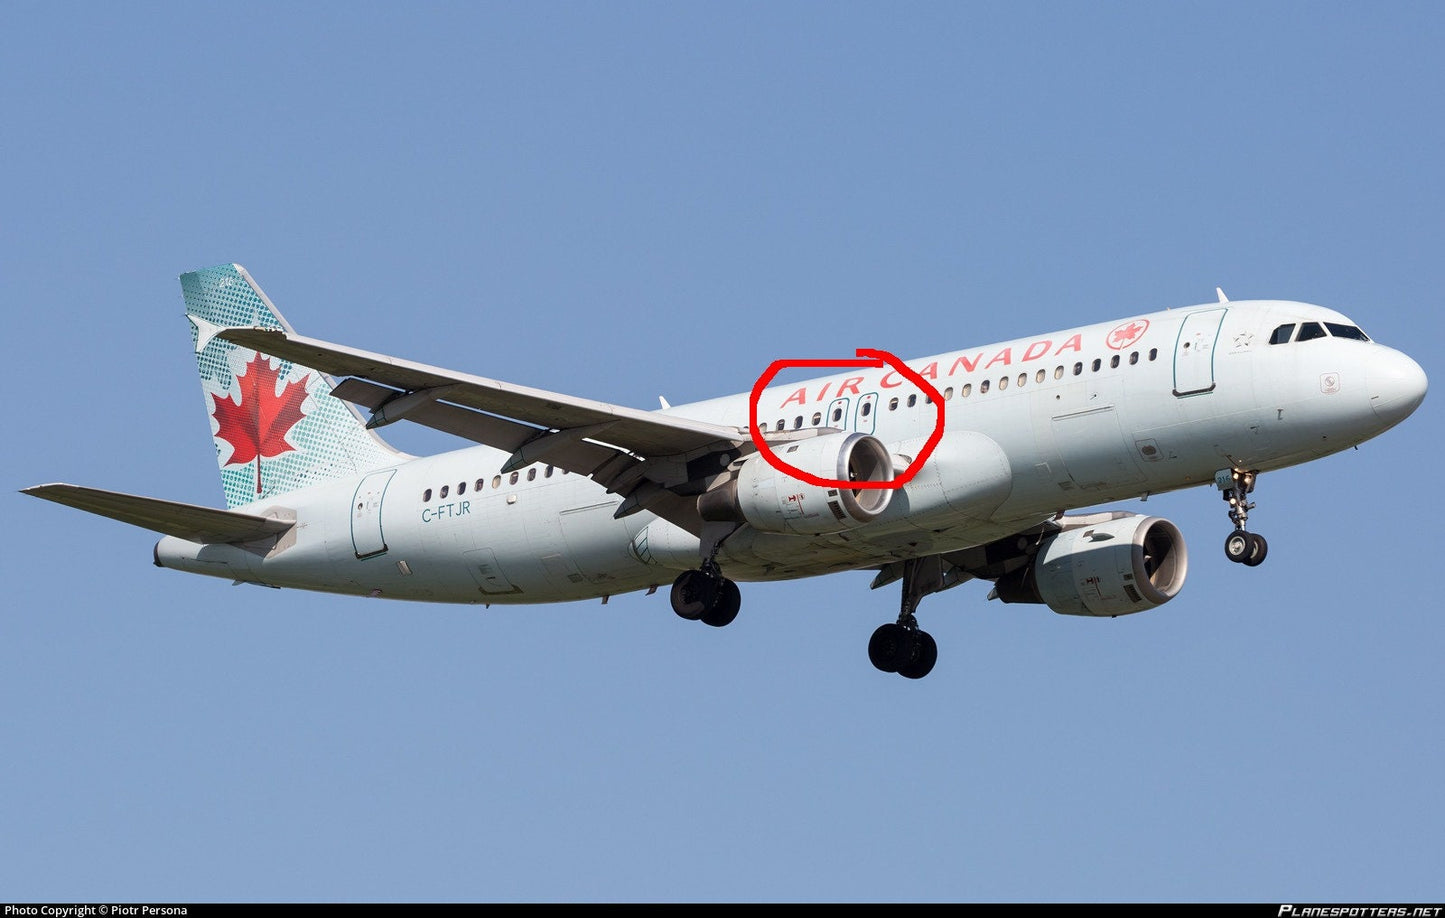 Airbus A320 Over Wing Exit Door | Air Canada MSN 248 C-FTJR | Worldwide Shipping